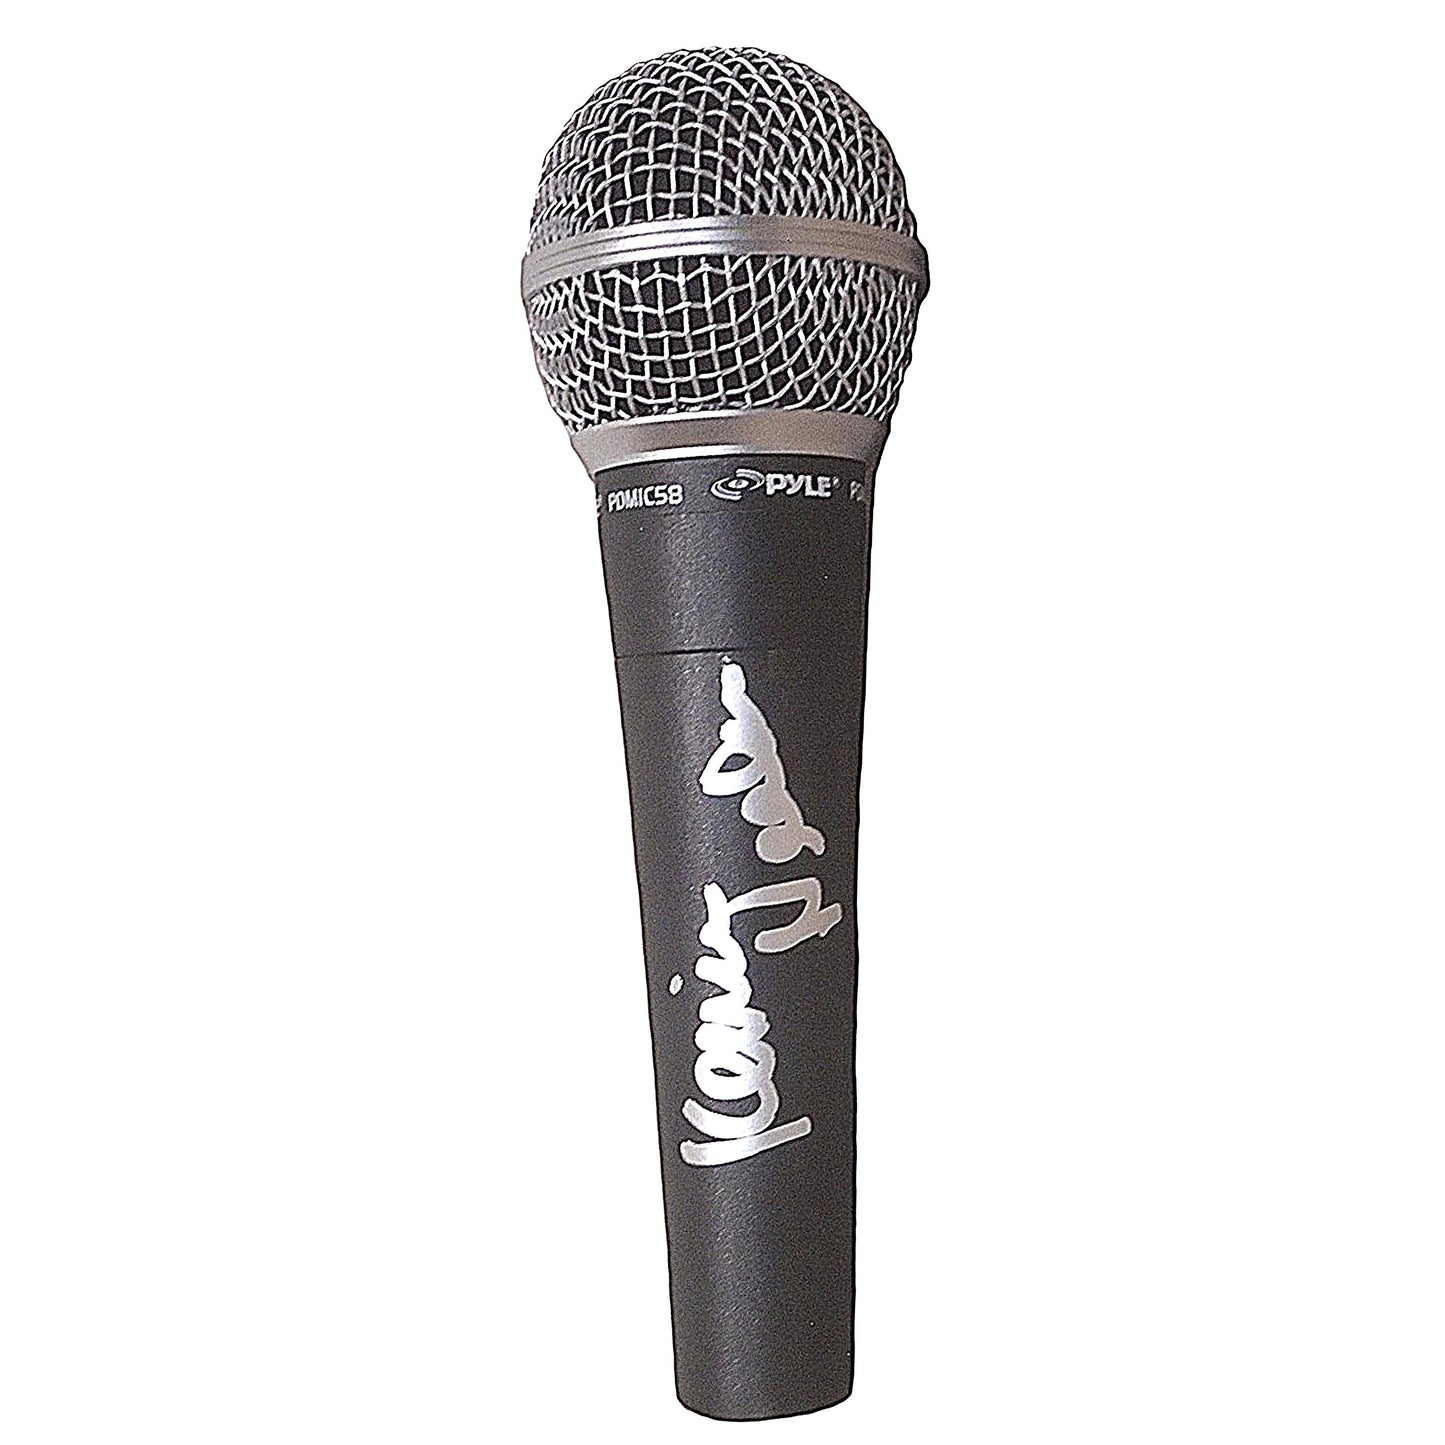 Hollywood-Autographed - Kevin Nealon Signed Pyle Full Size Microphone with Proof Photo - Beckett BAS 103a